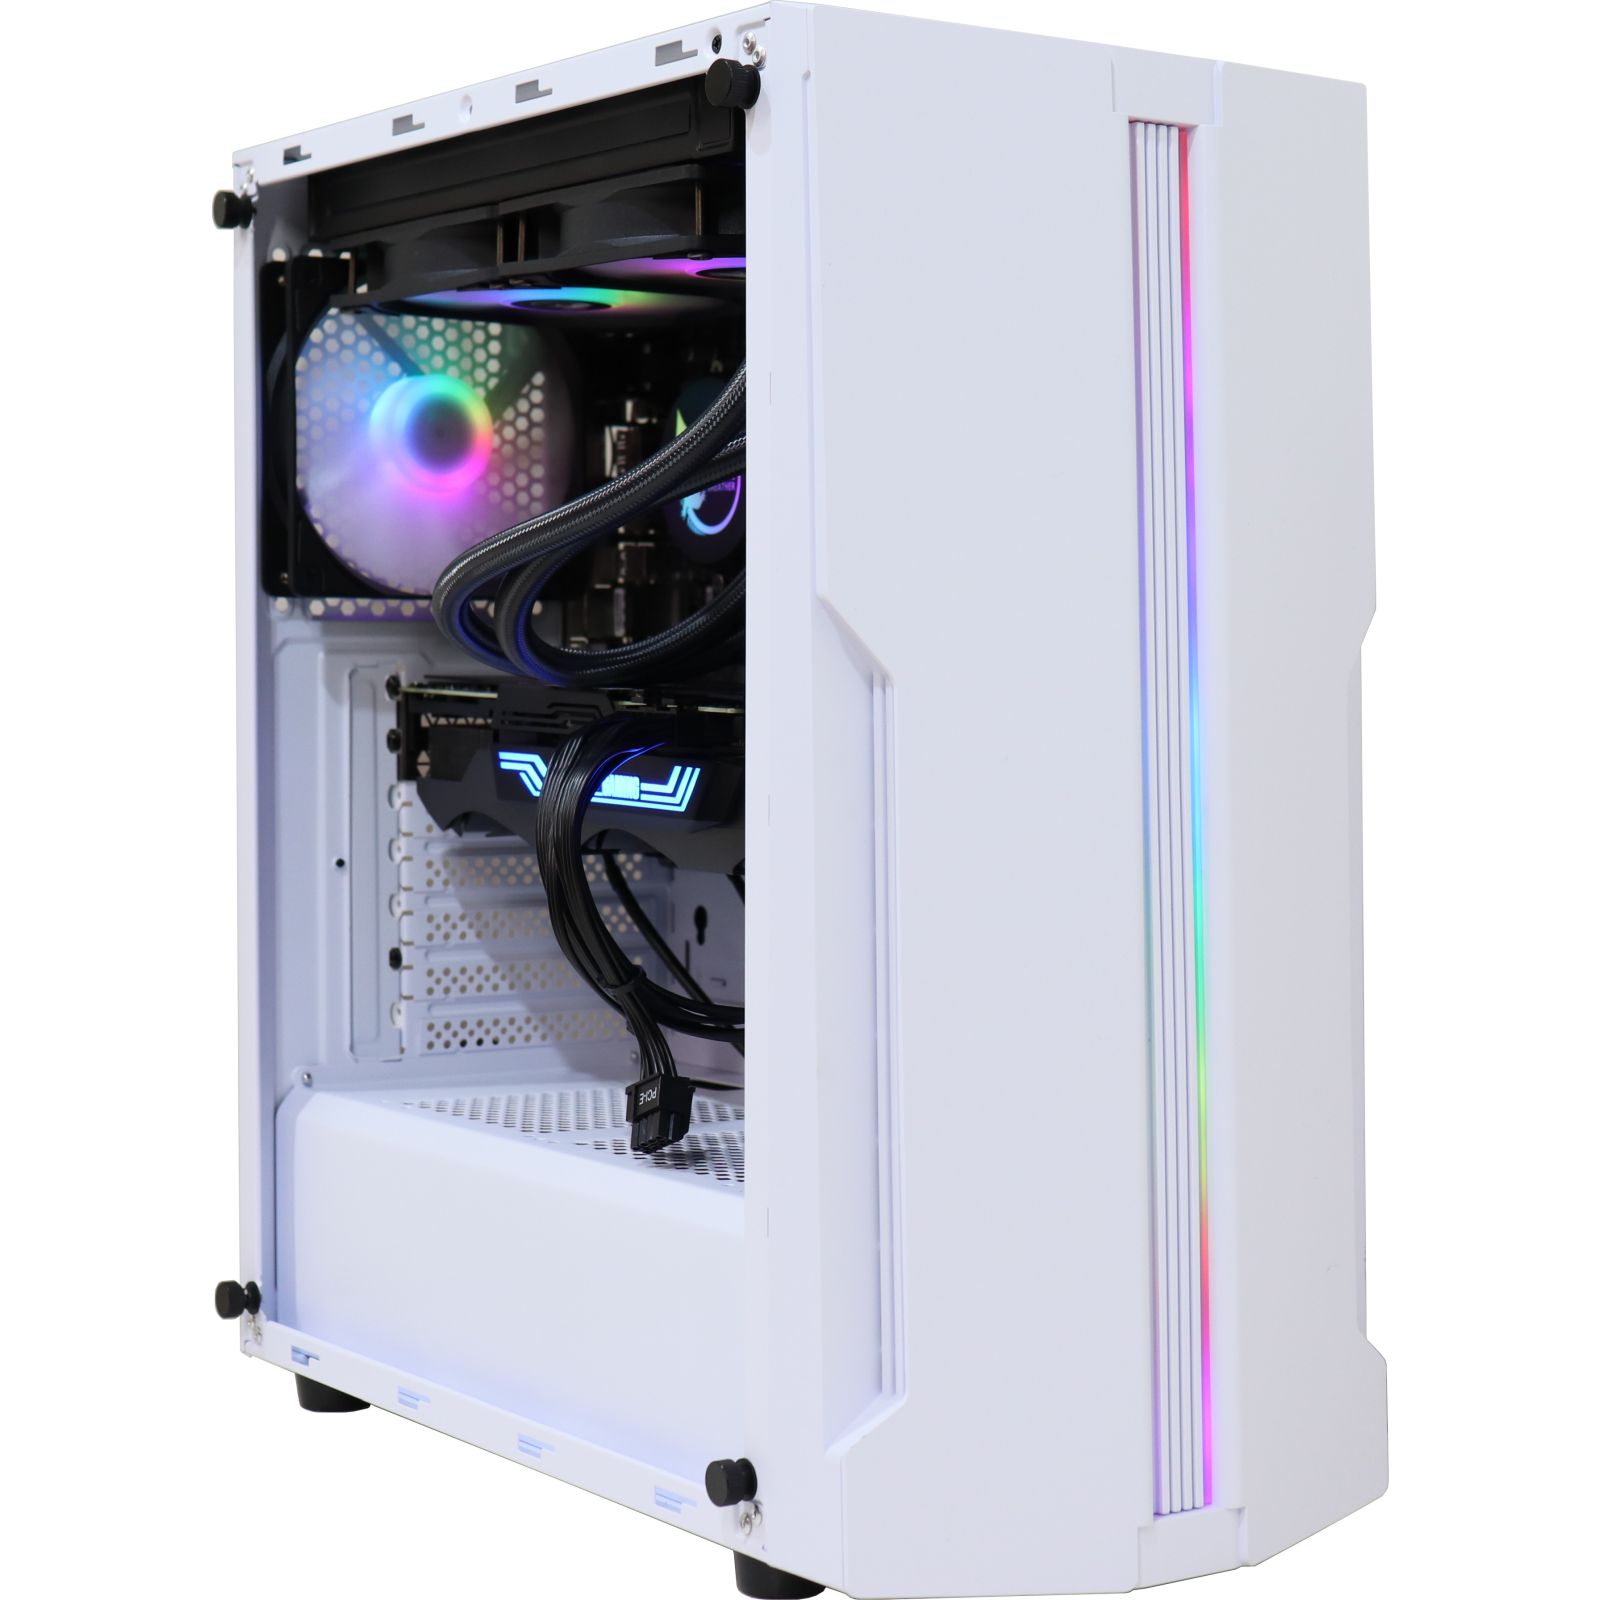 Firebreather White WI2780 Intel Core i7 12700F 12-Core (20 threads) tot 4.9Ghz Nvidia RTX 3070 Ti kaart 500GB NVME SSD 16GB DDR4